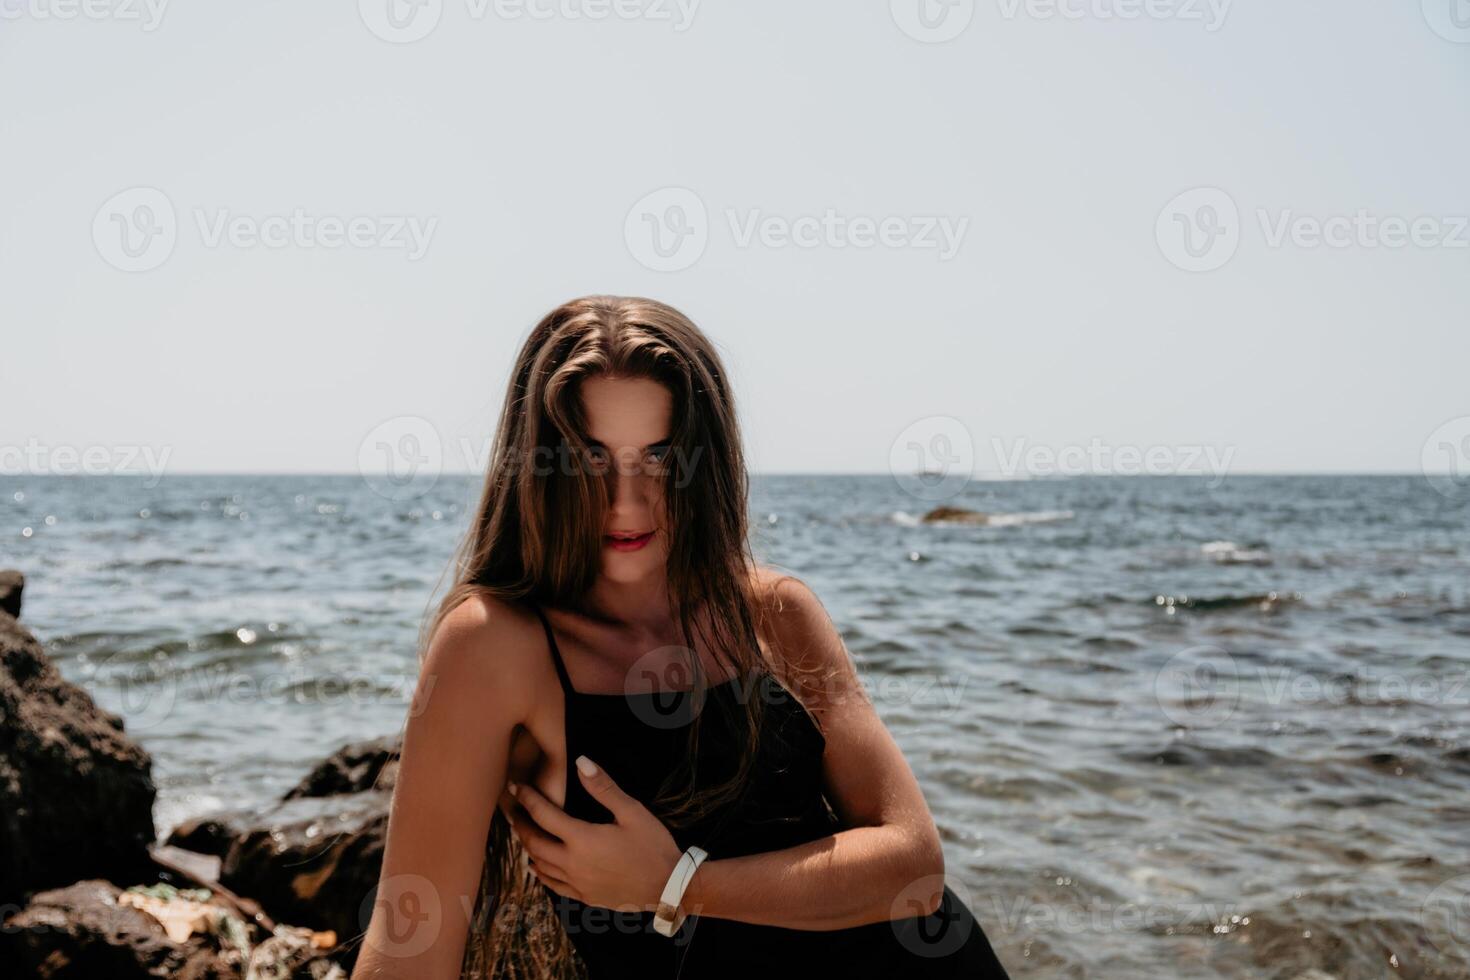 Woman summer travel sea. Happy tourist in hat enjoy taking picture outdoors for memories. Woman traveler posing on the beach at sea surrounded by volcanic mountains, sharing travel adventure journey photo